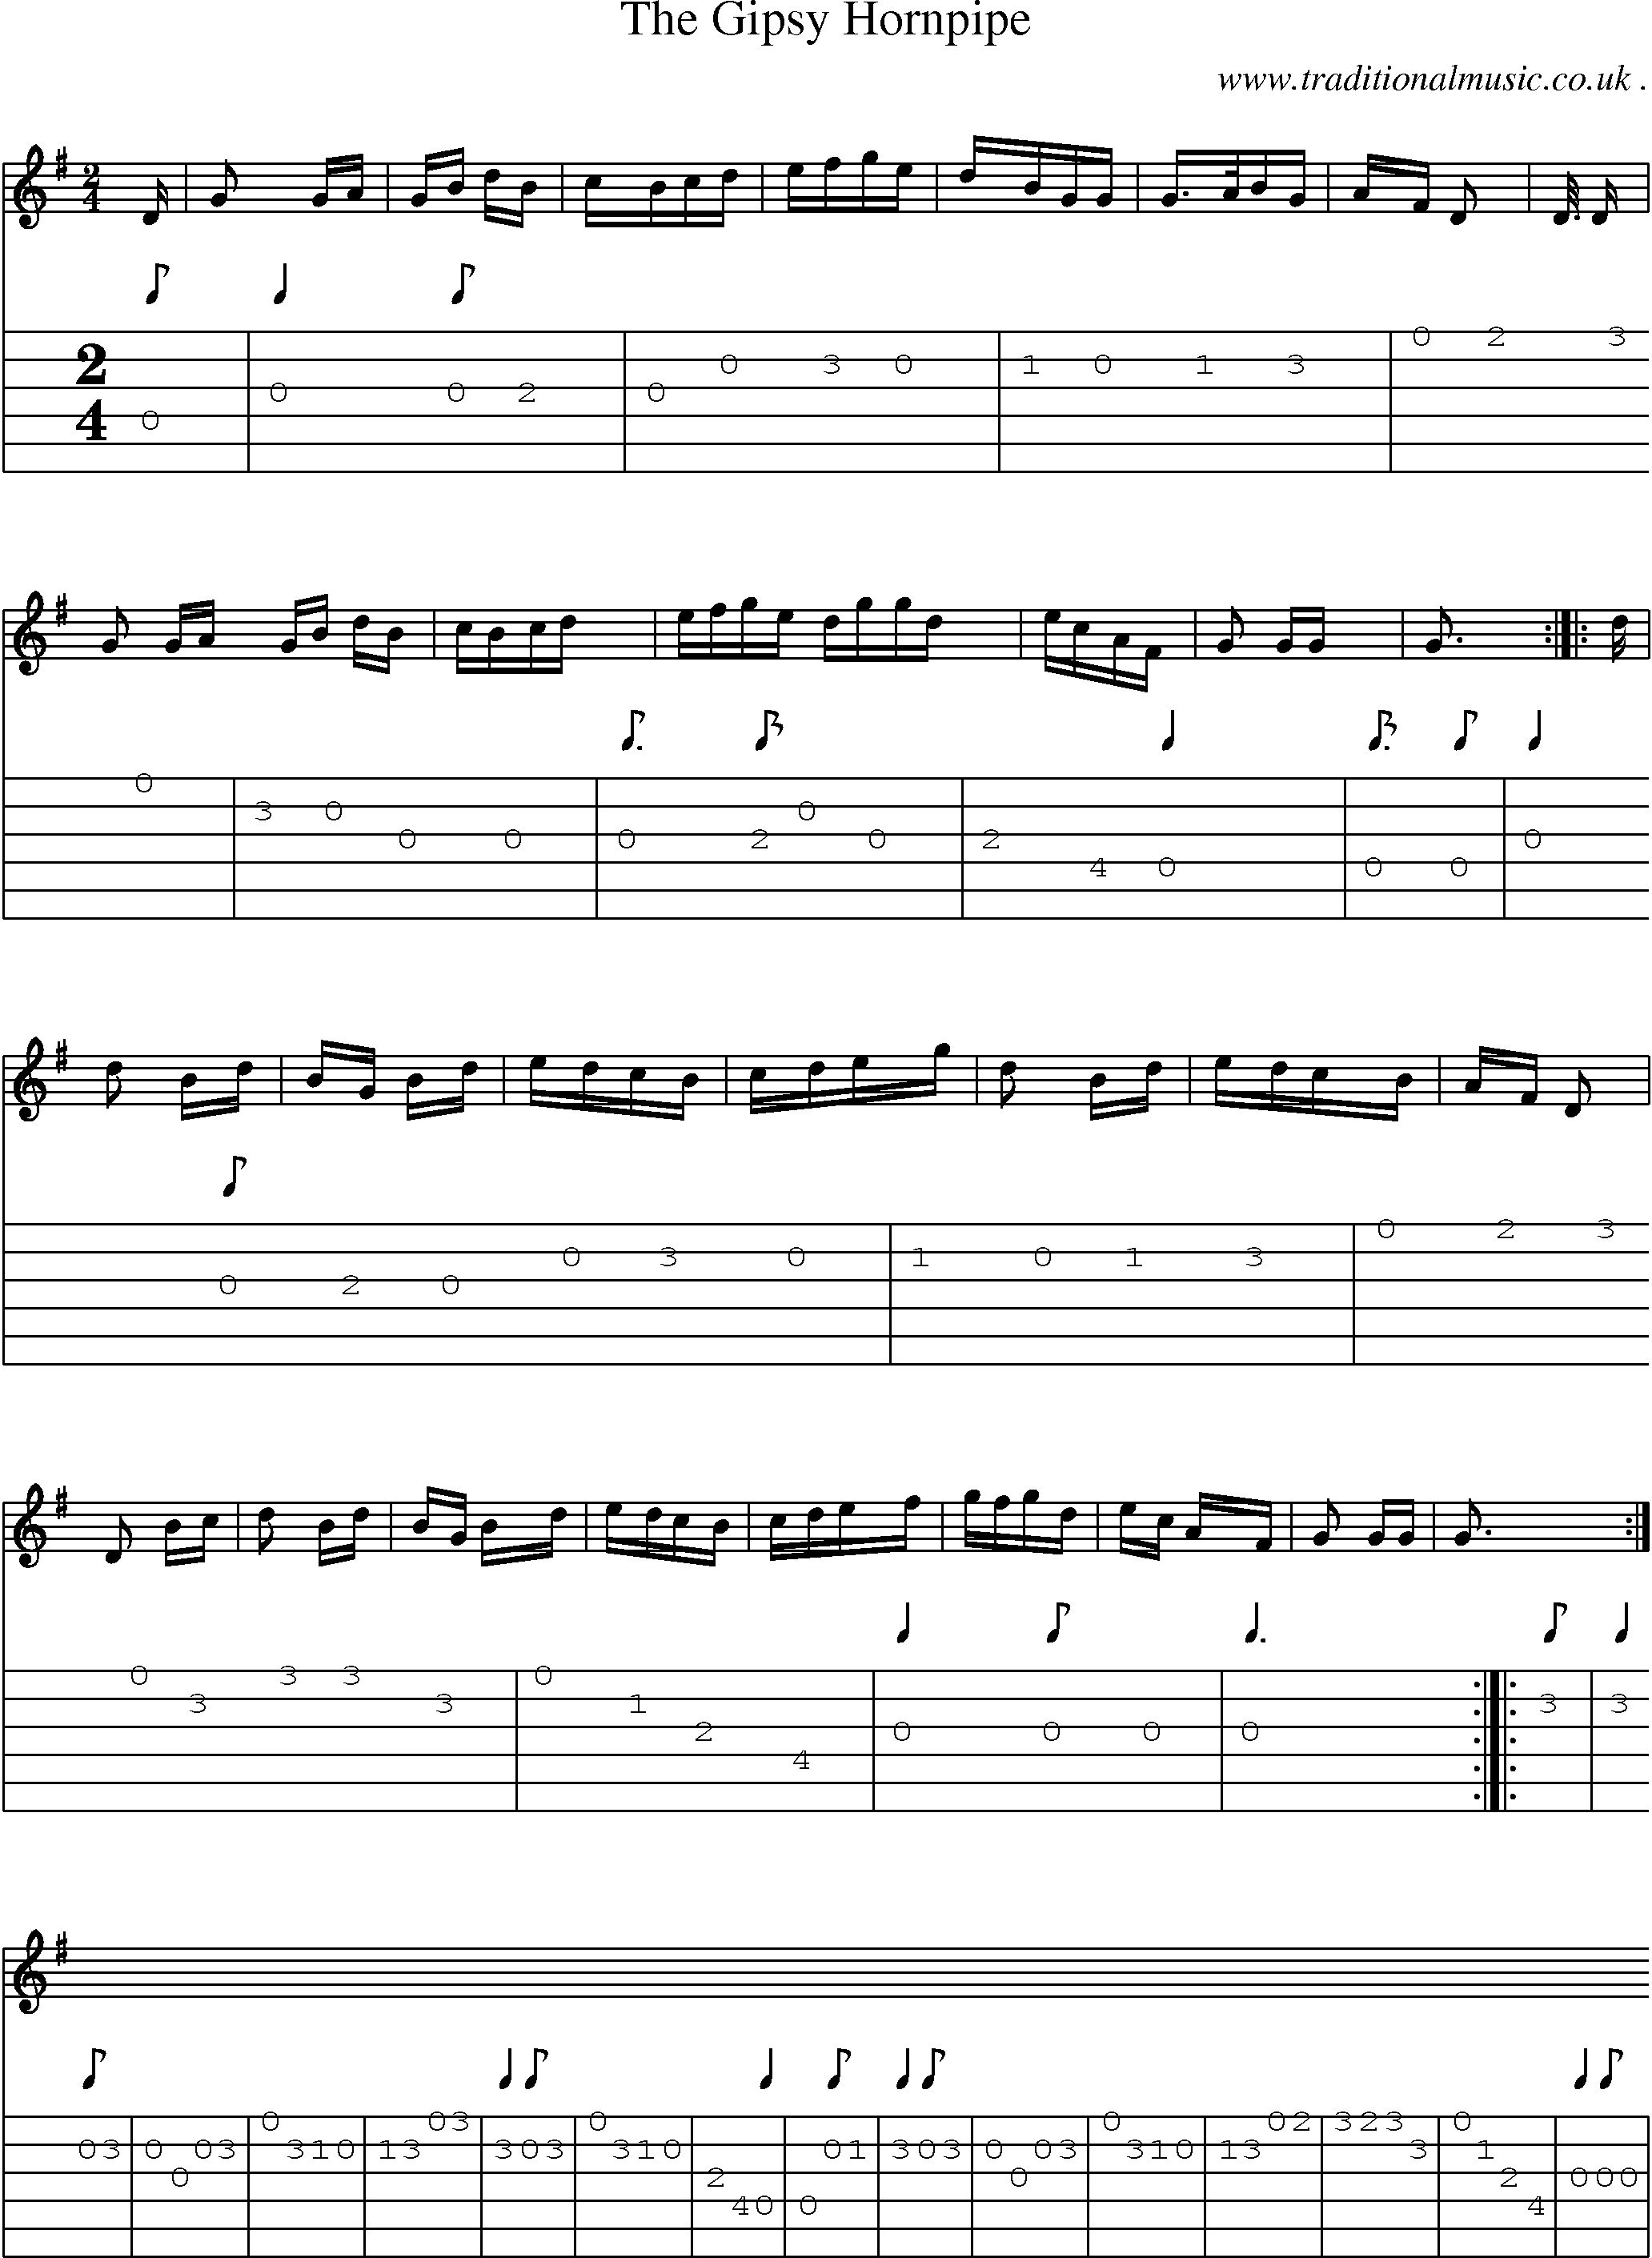 Sheet-Music and Guitar Tabs for The Gipsy Hornpipe